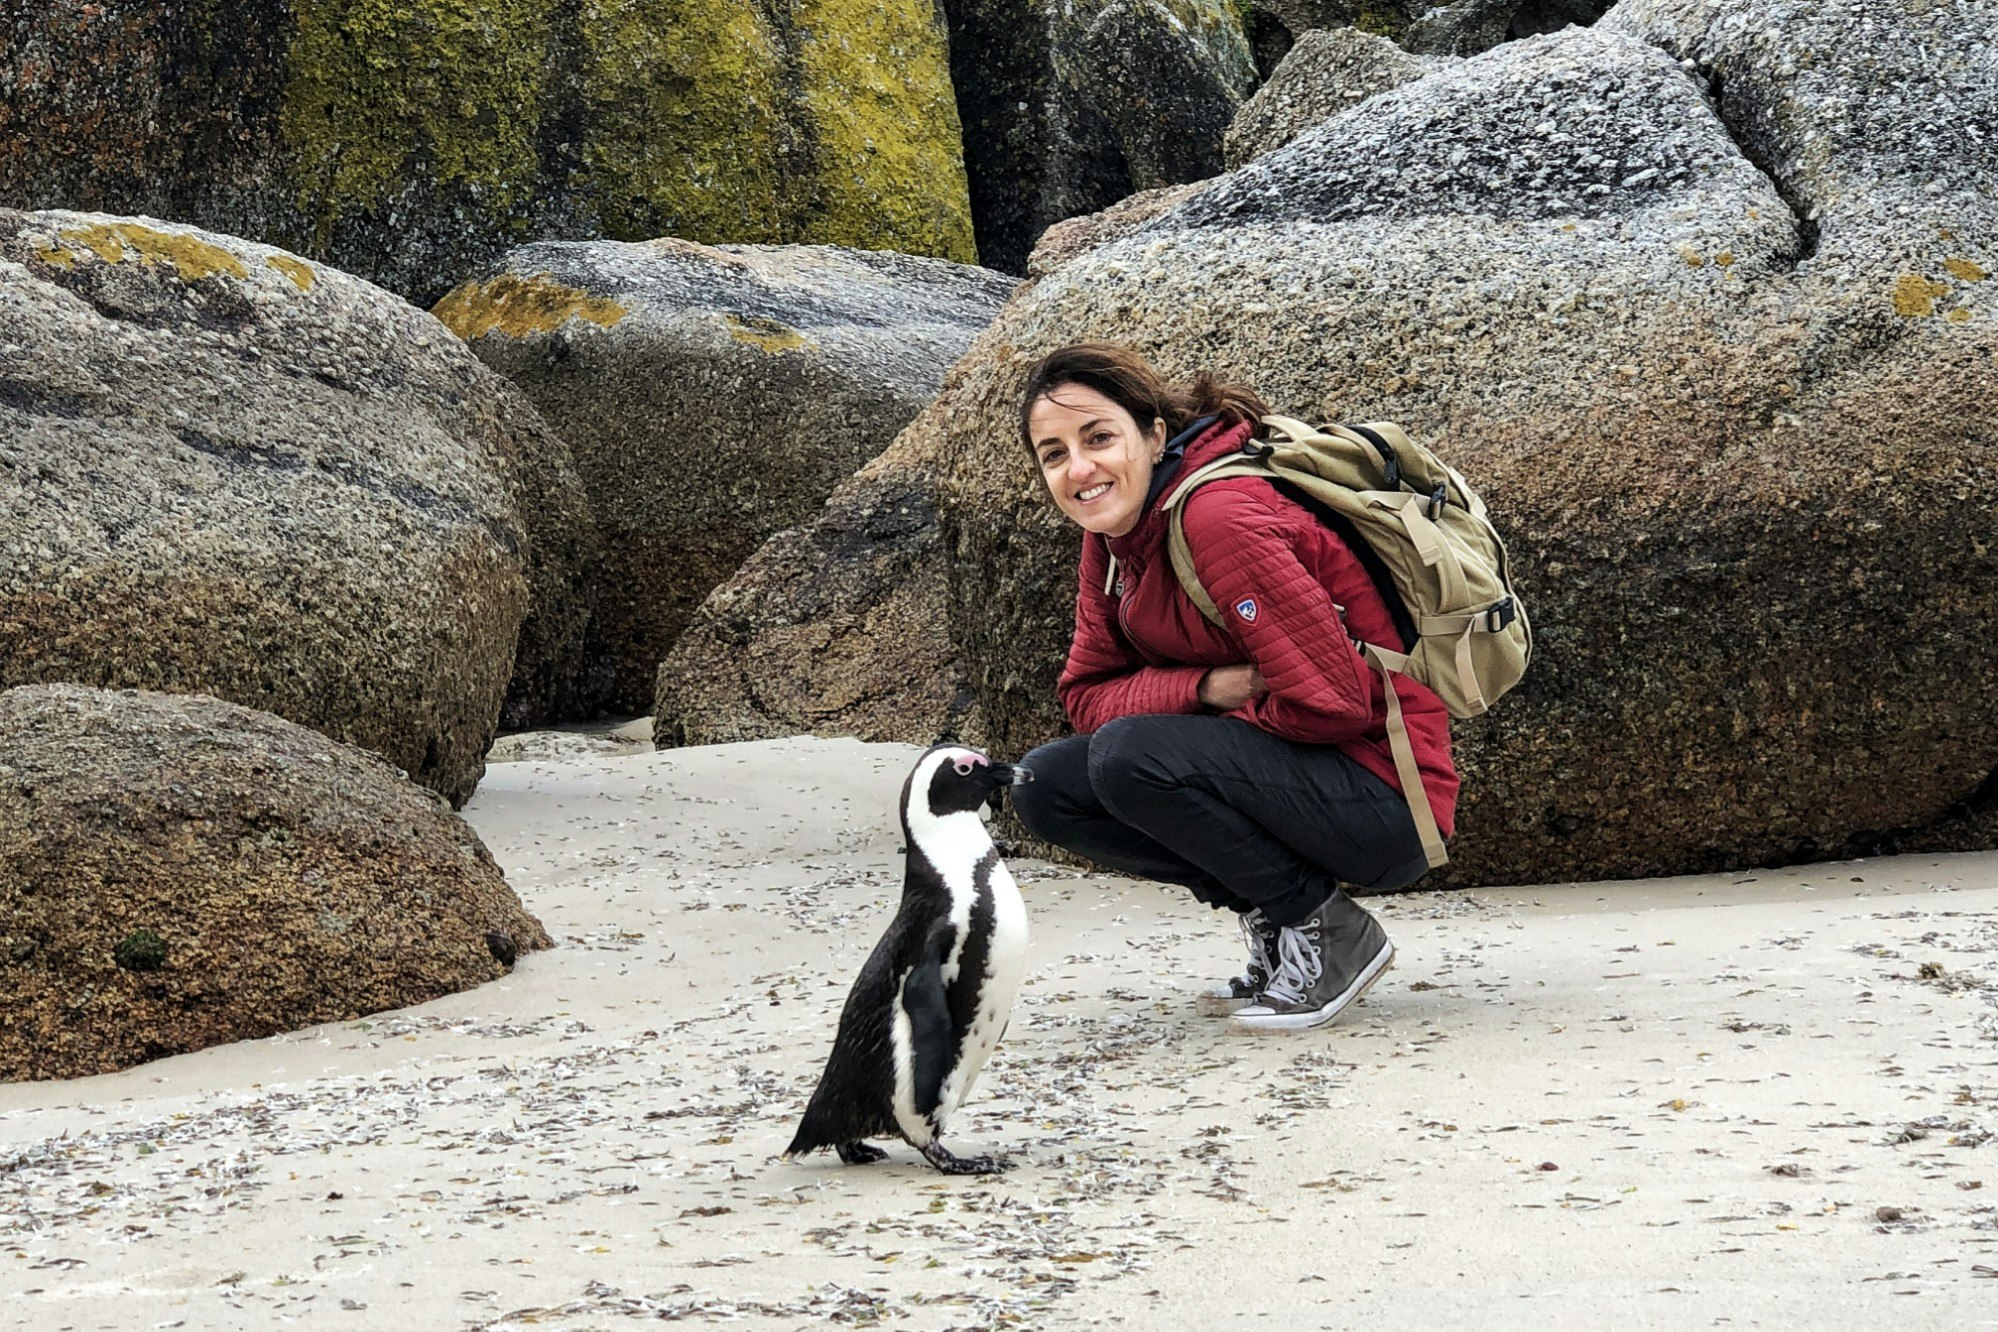 Claudia crouches down on a beach next to a penguin.